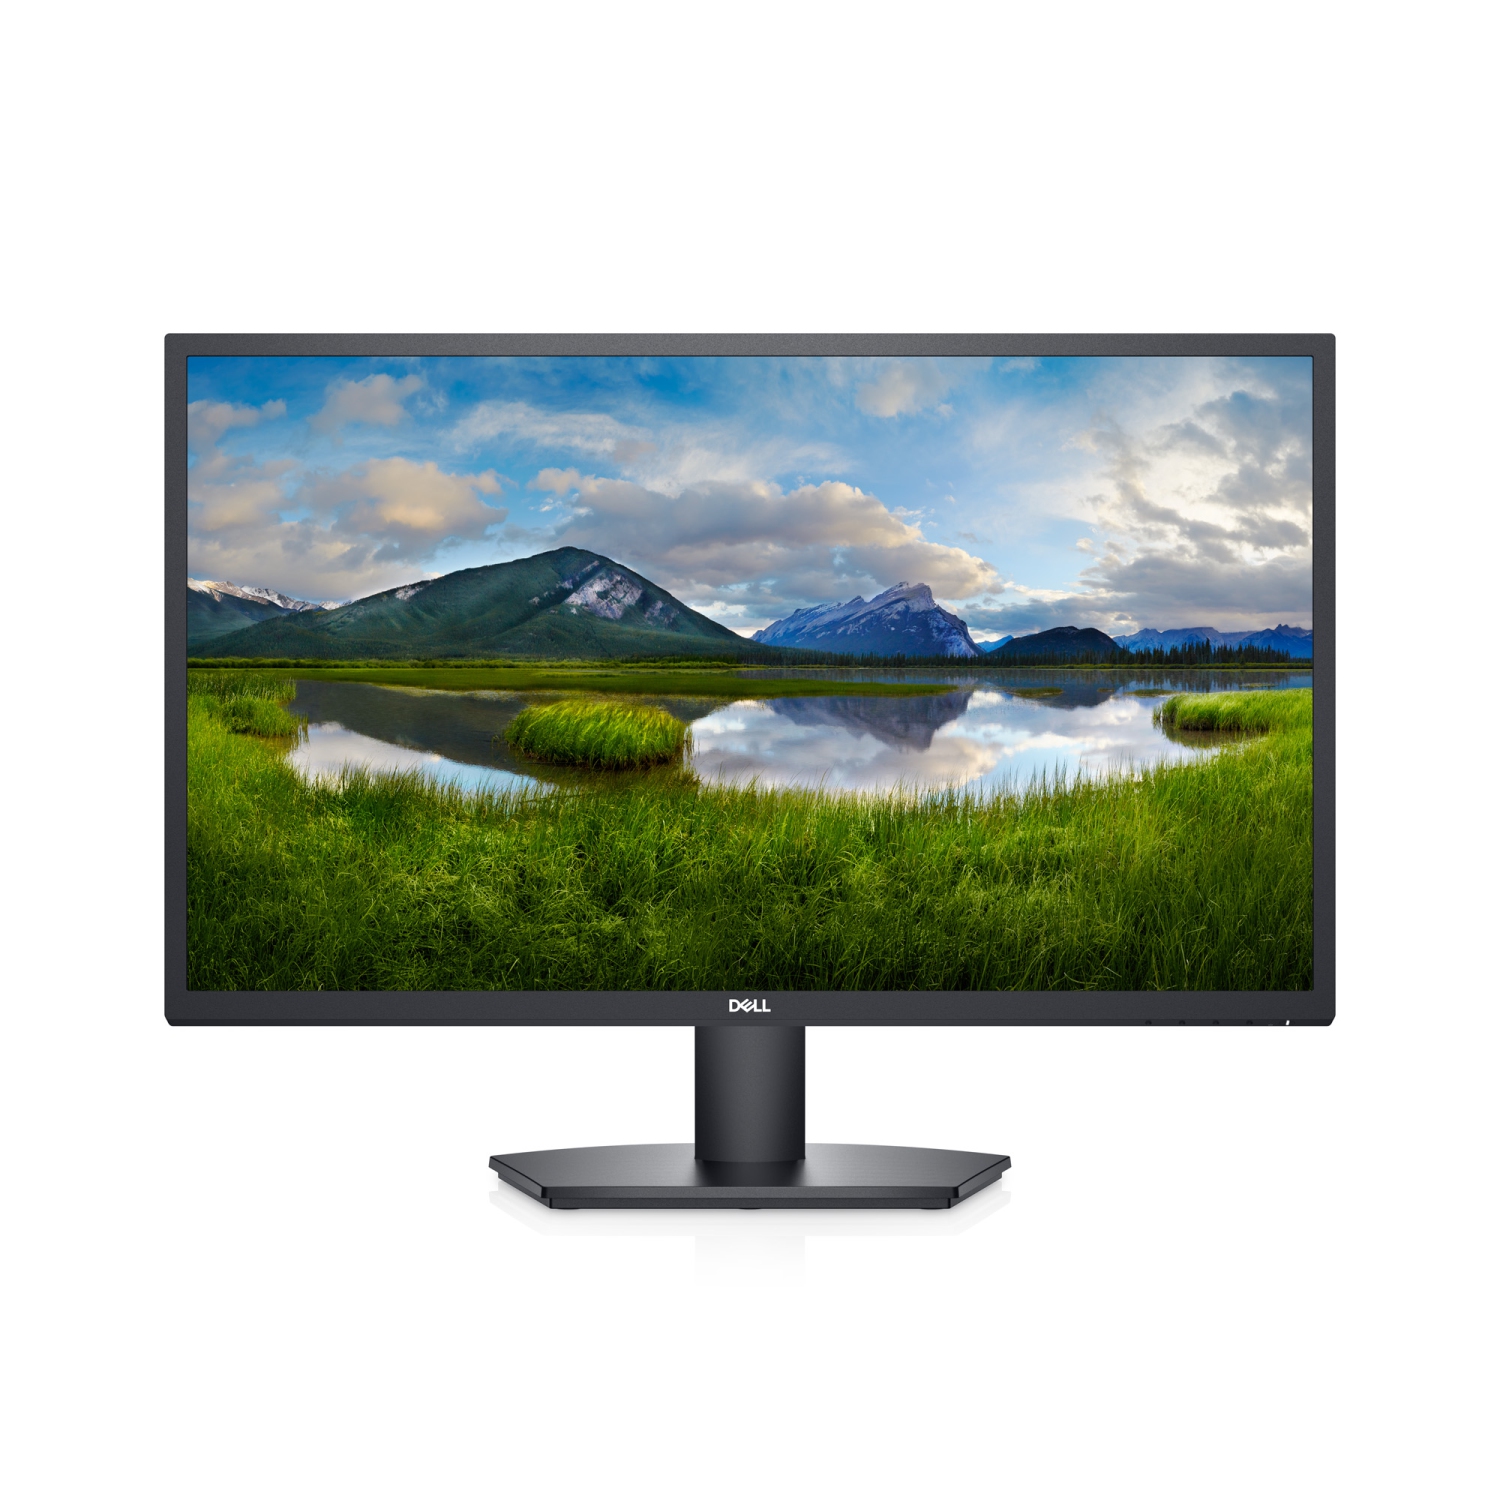 Dell SE2722H 27" FHD LED Monitor with AMD FreeSync, HDMI and VGA Inputs